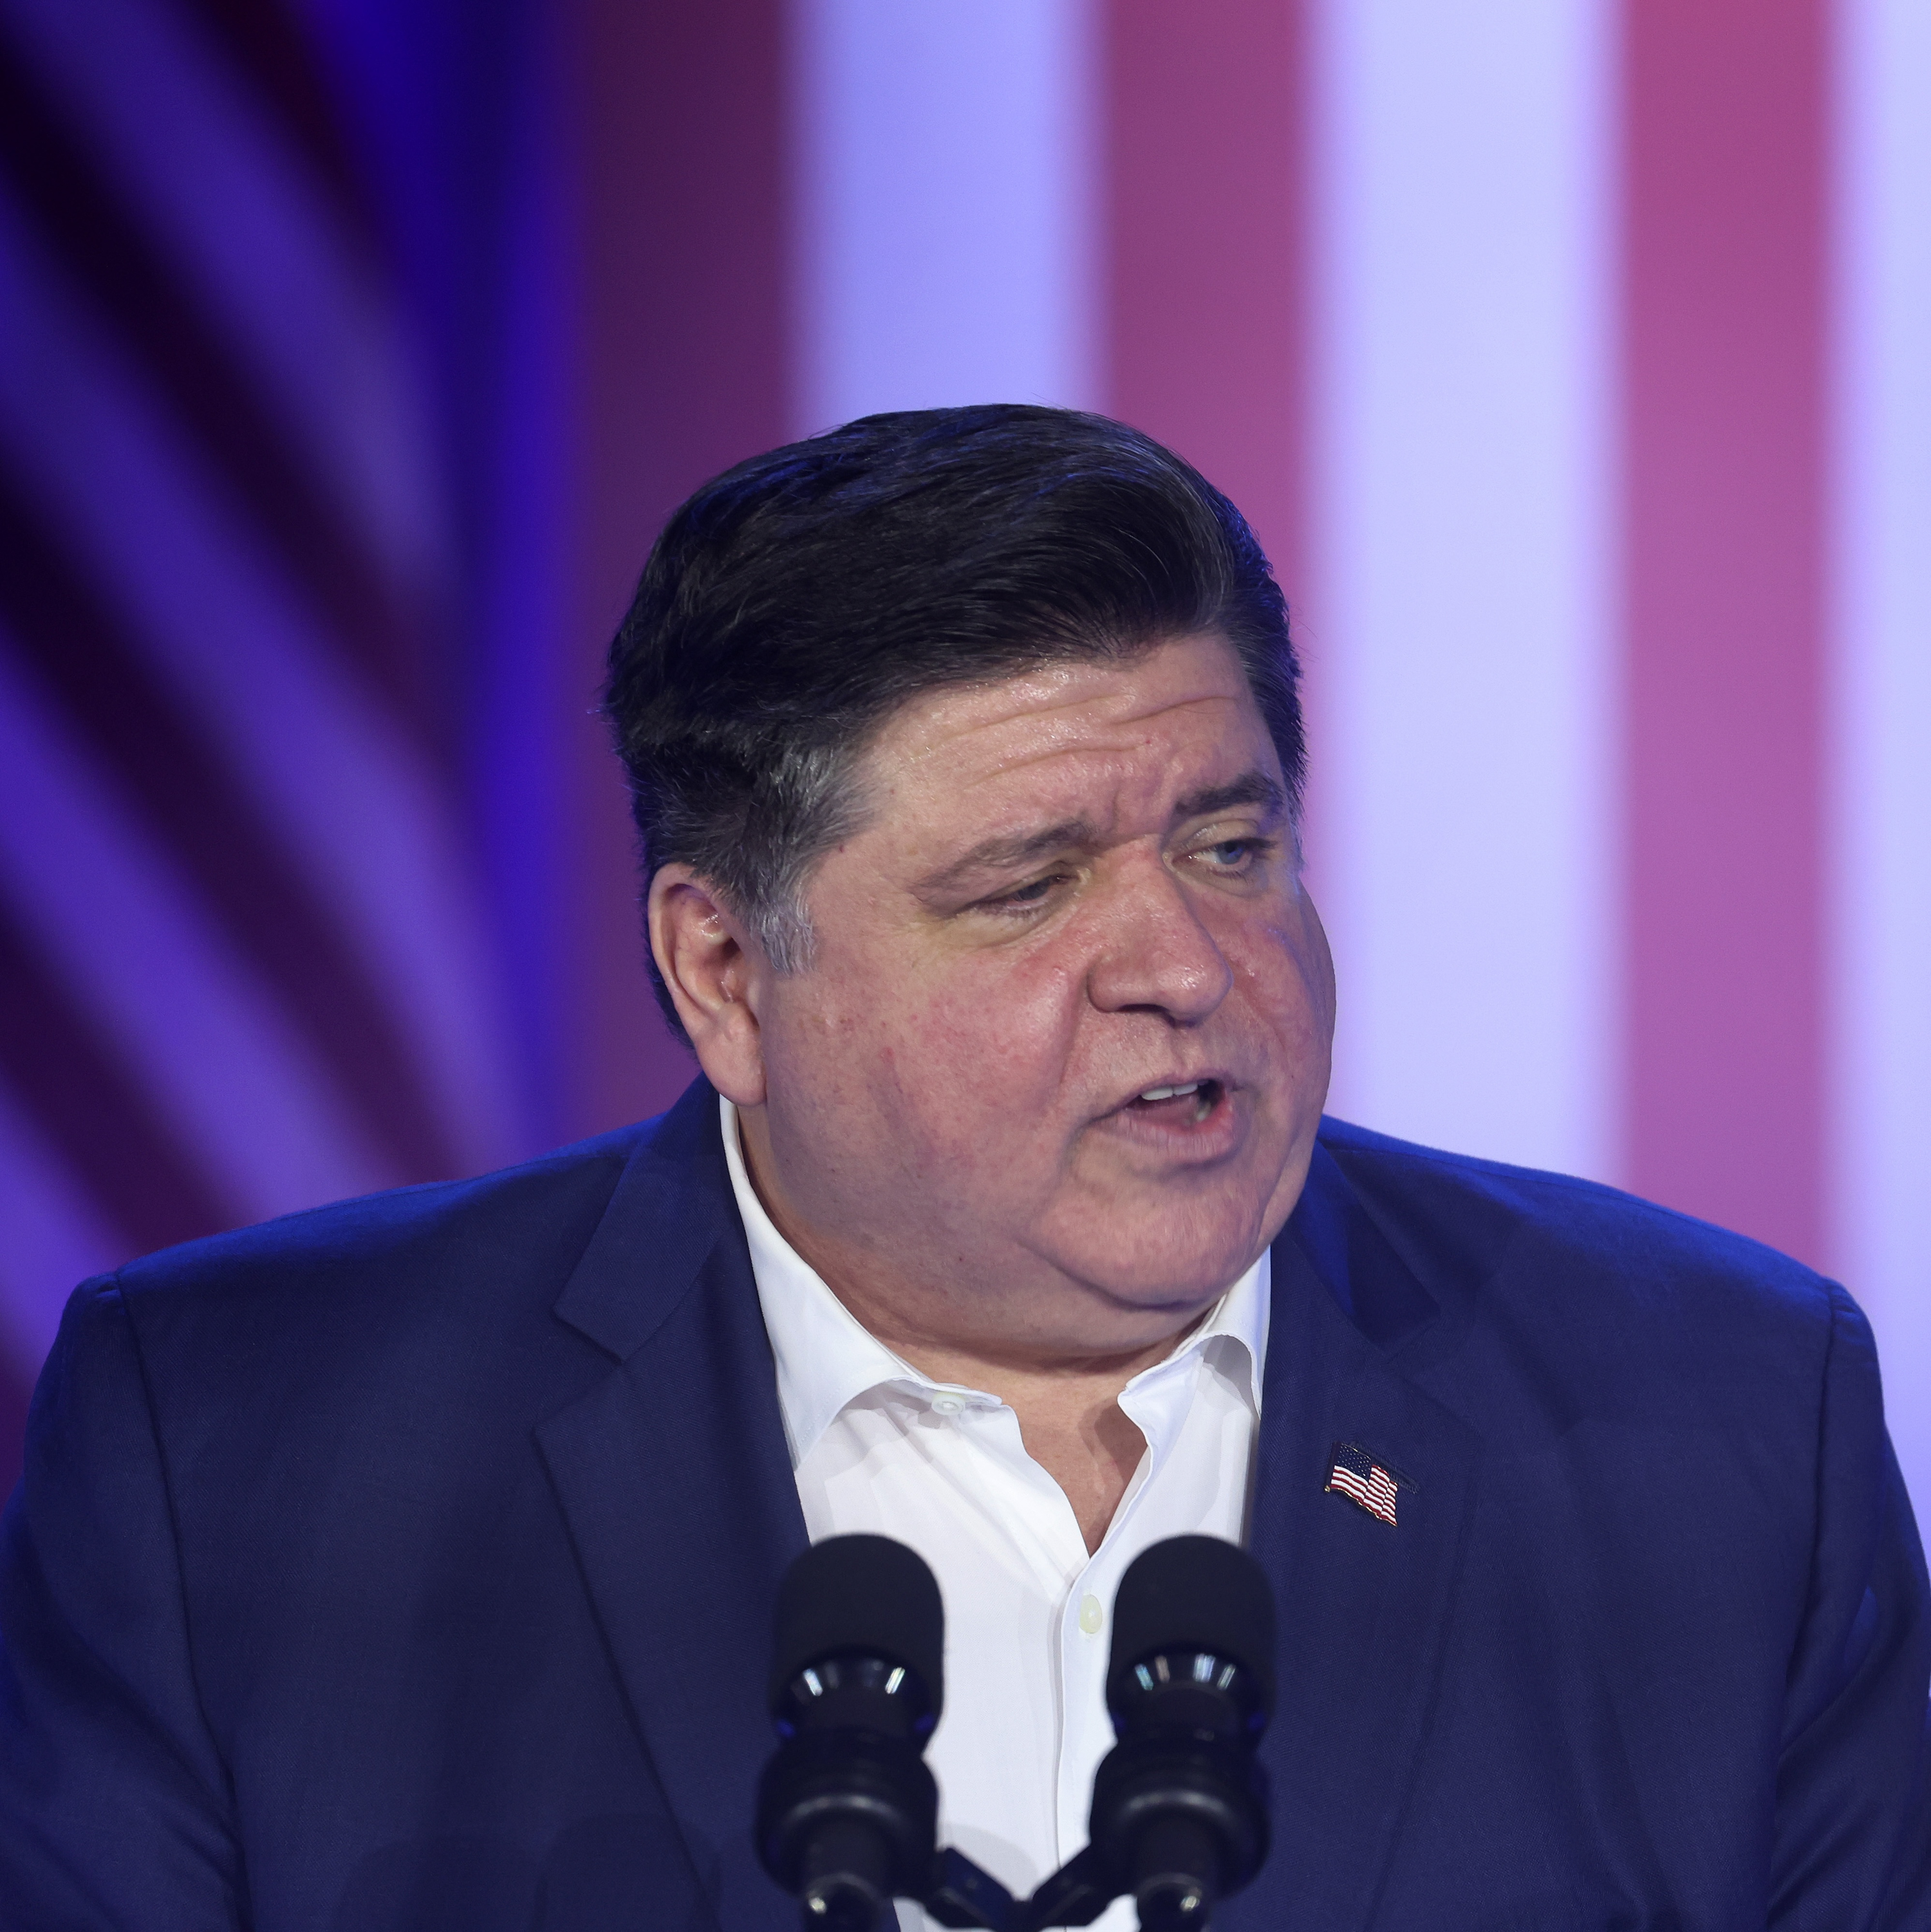 Pritzker reacts to deadly domestic shooting, calls for legislative changes